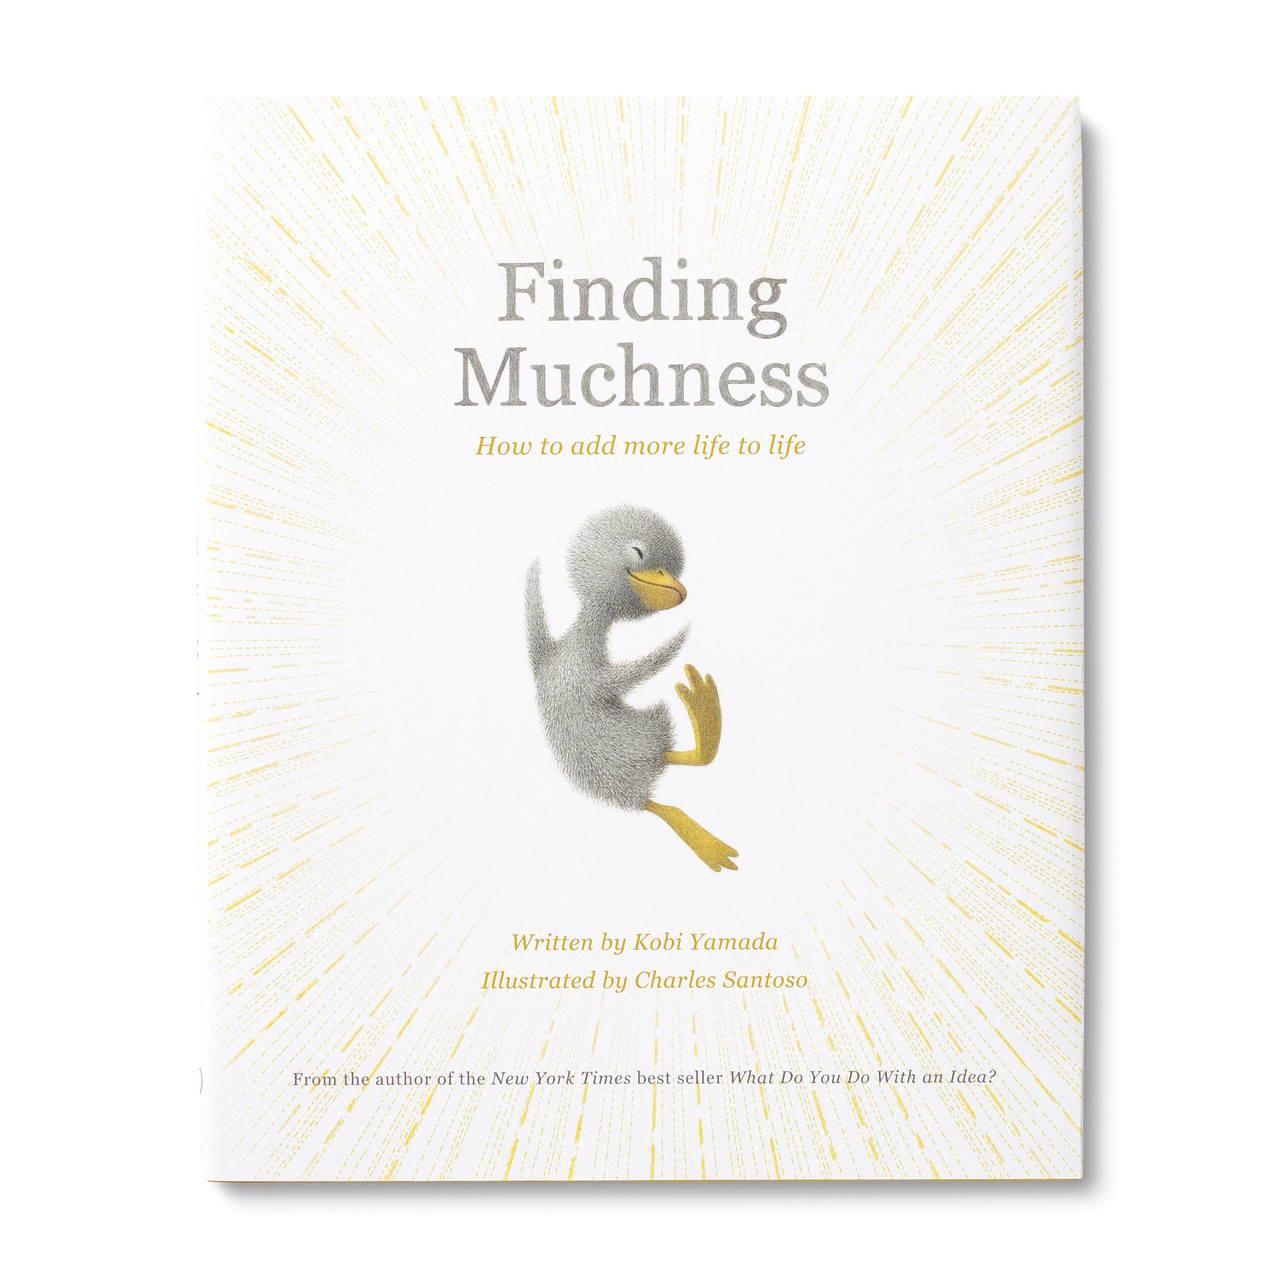 "Finding Muchness" Book by Kobi Yamada book cover featuring a cute duckling